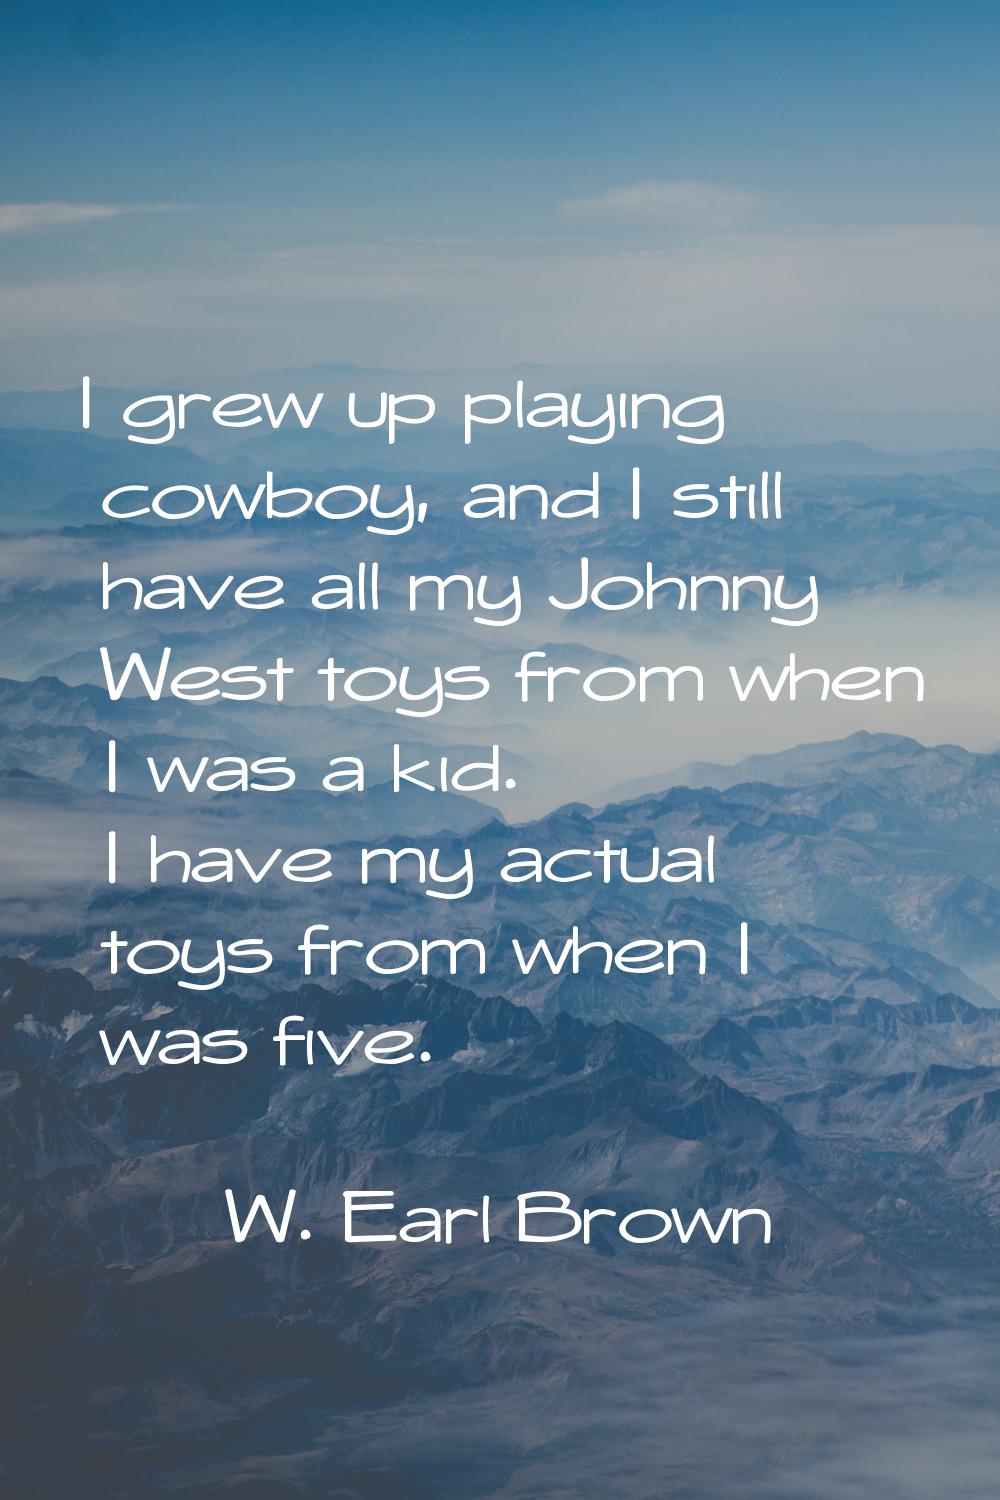 I grew up playing cowboy, and I still have all my Johnny West toys from when I was a kid. I have my